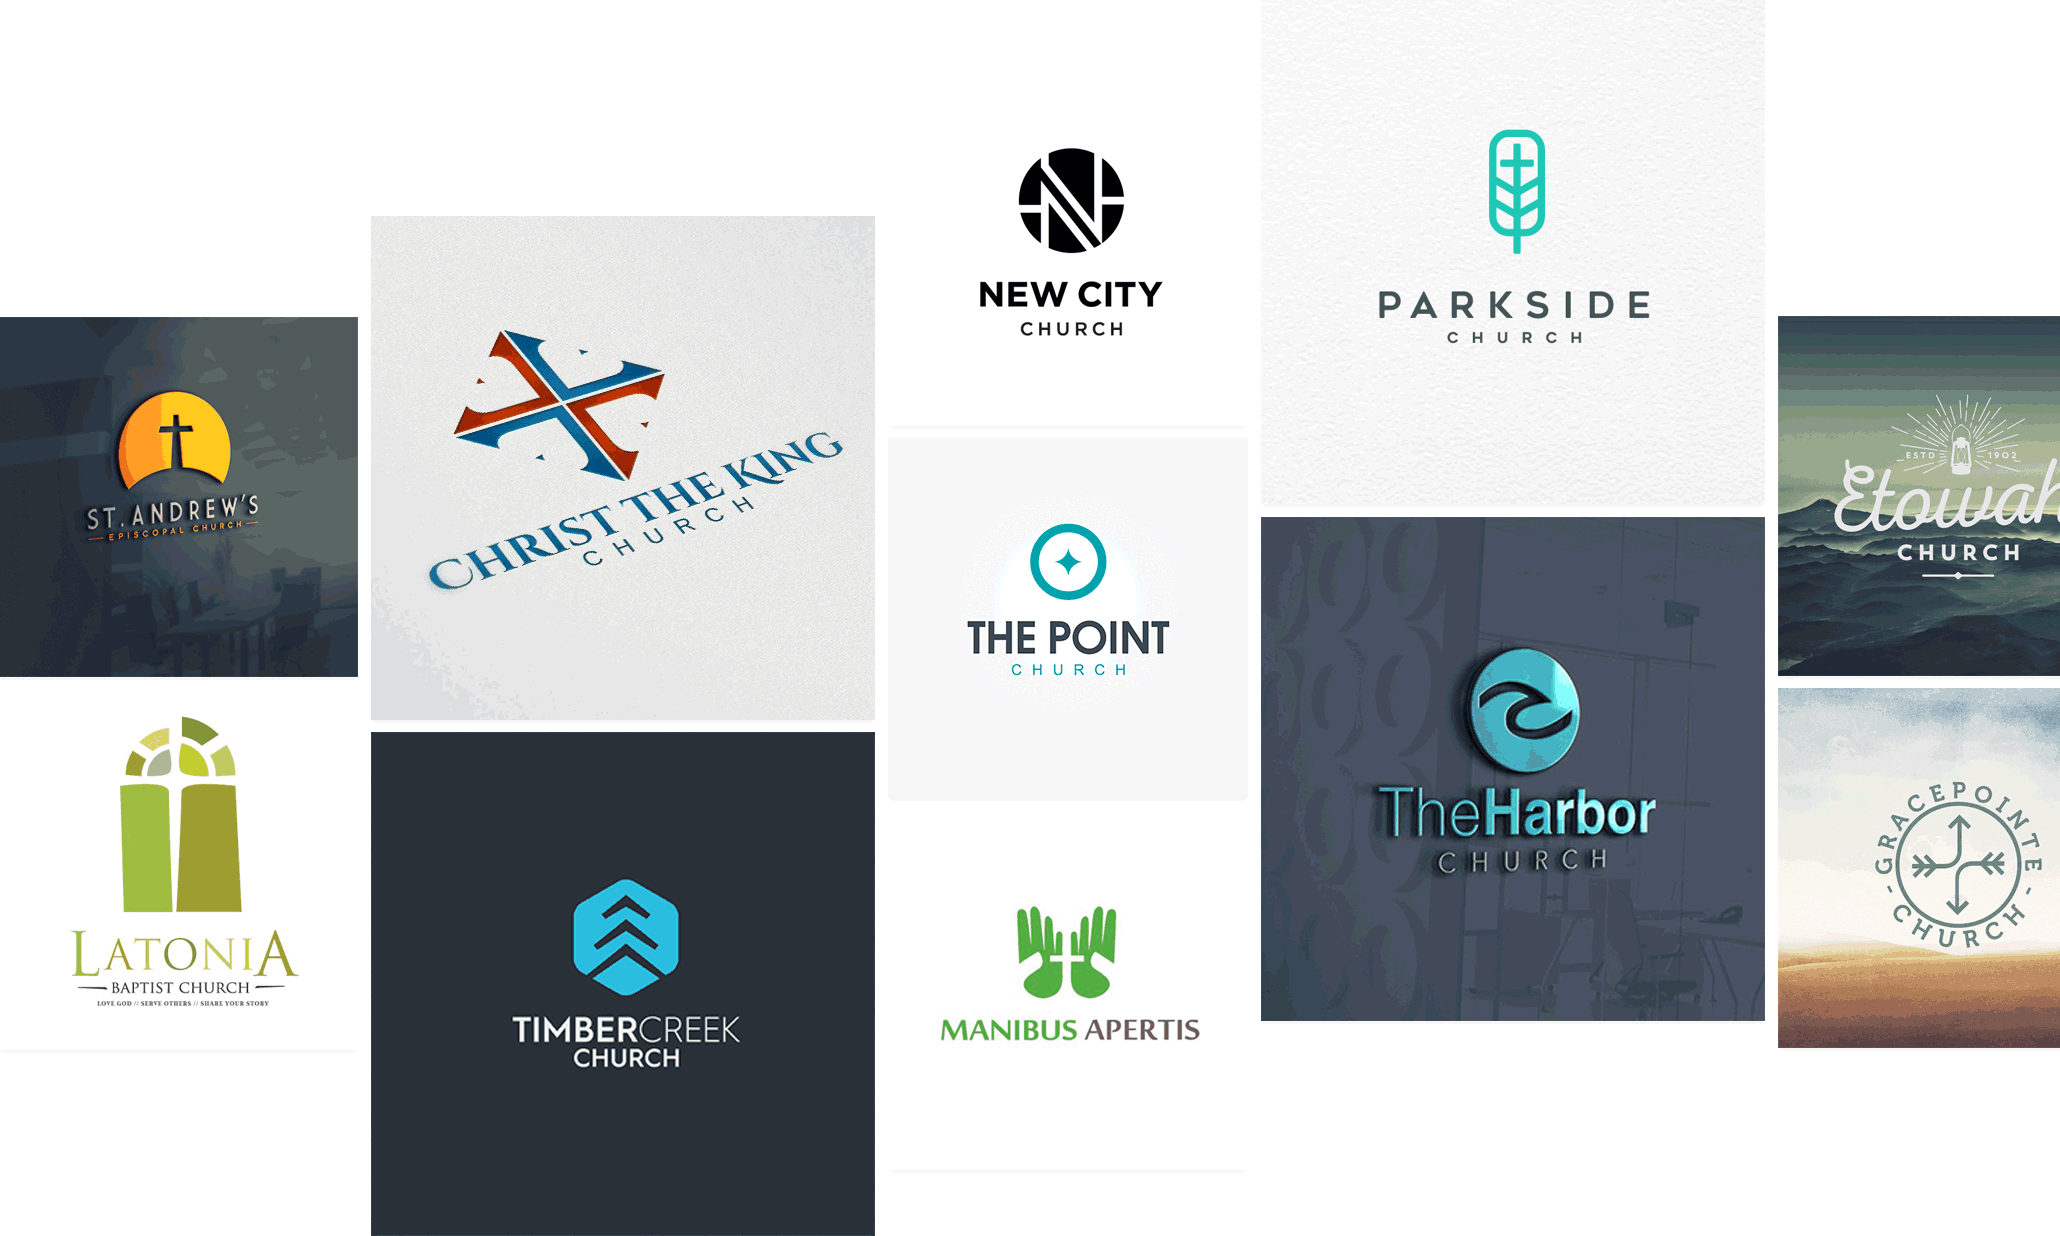 other logos